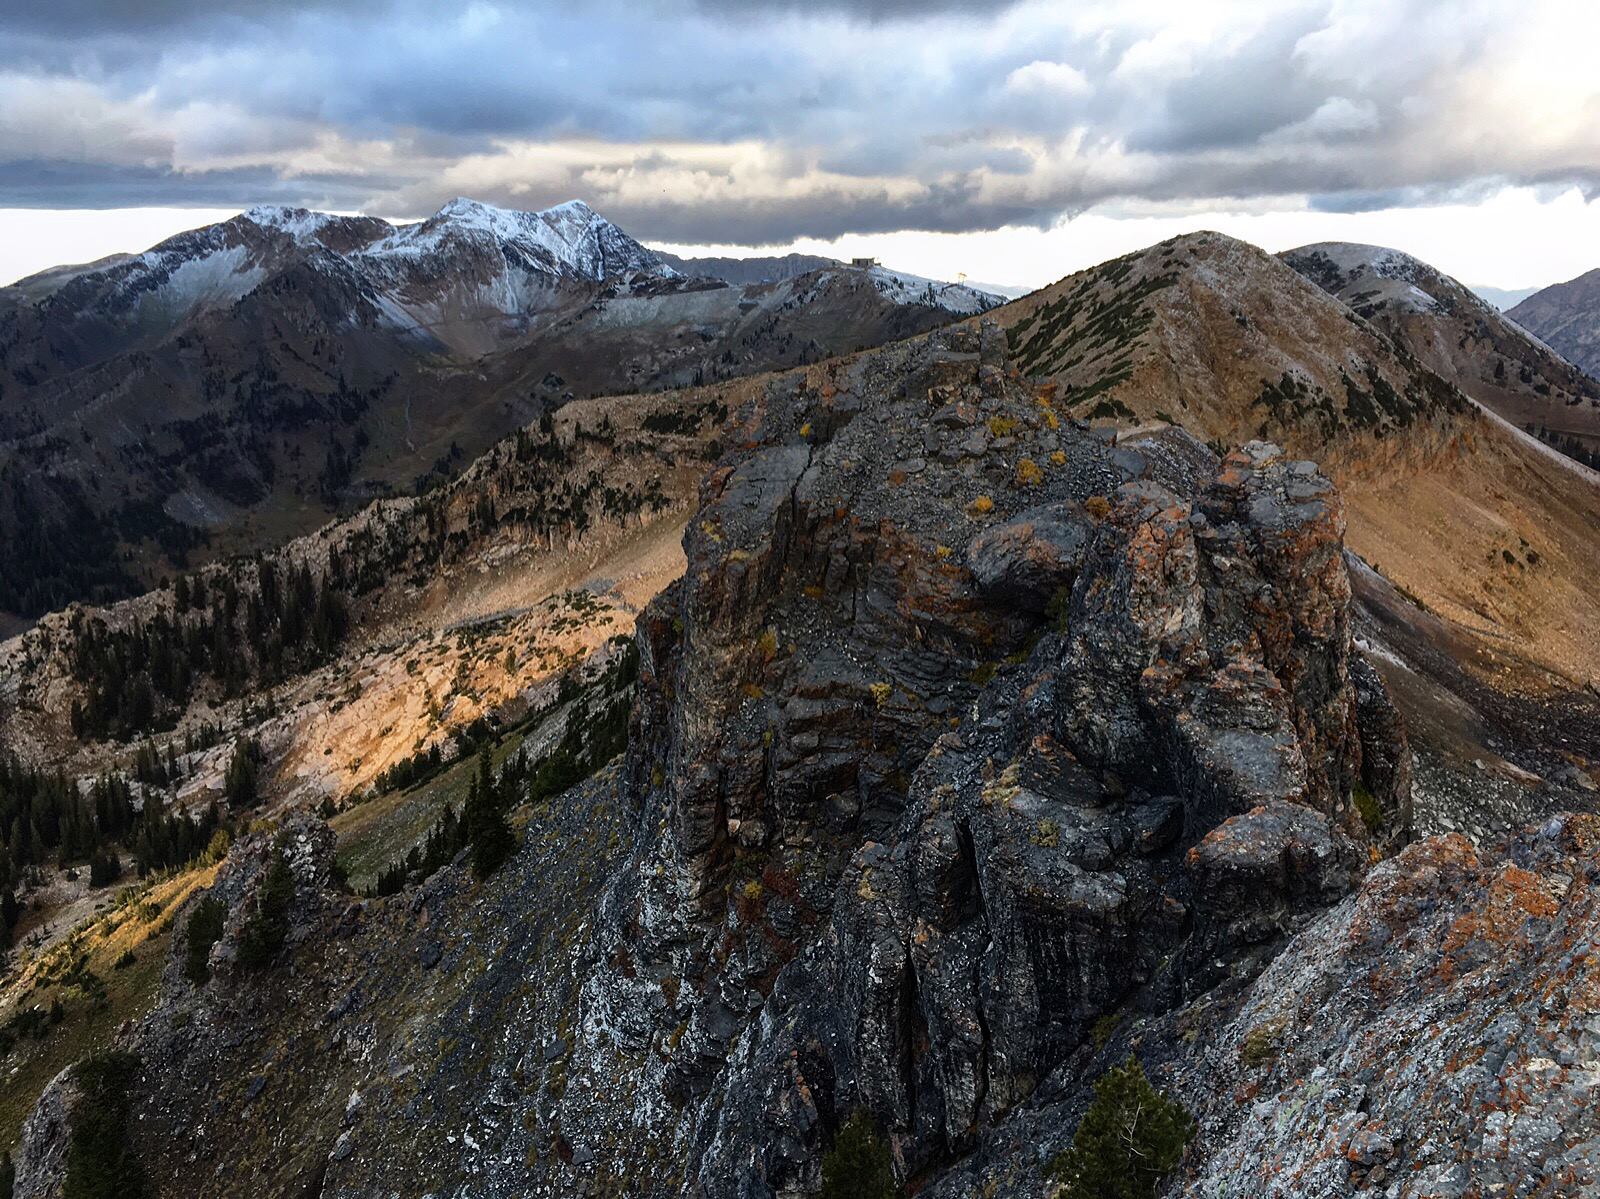 Snow in the Wasatch today. photo: Drew Petersen